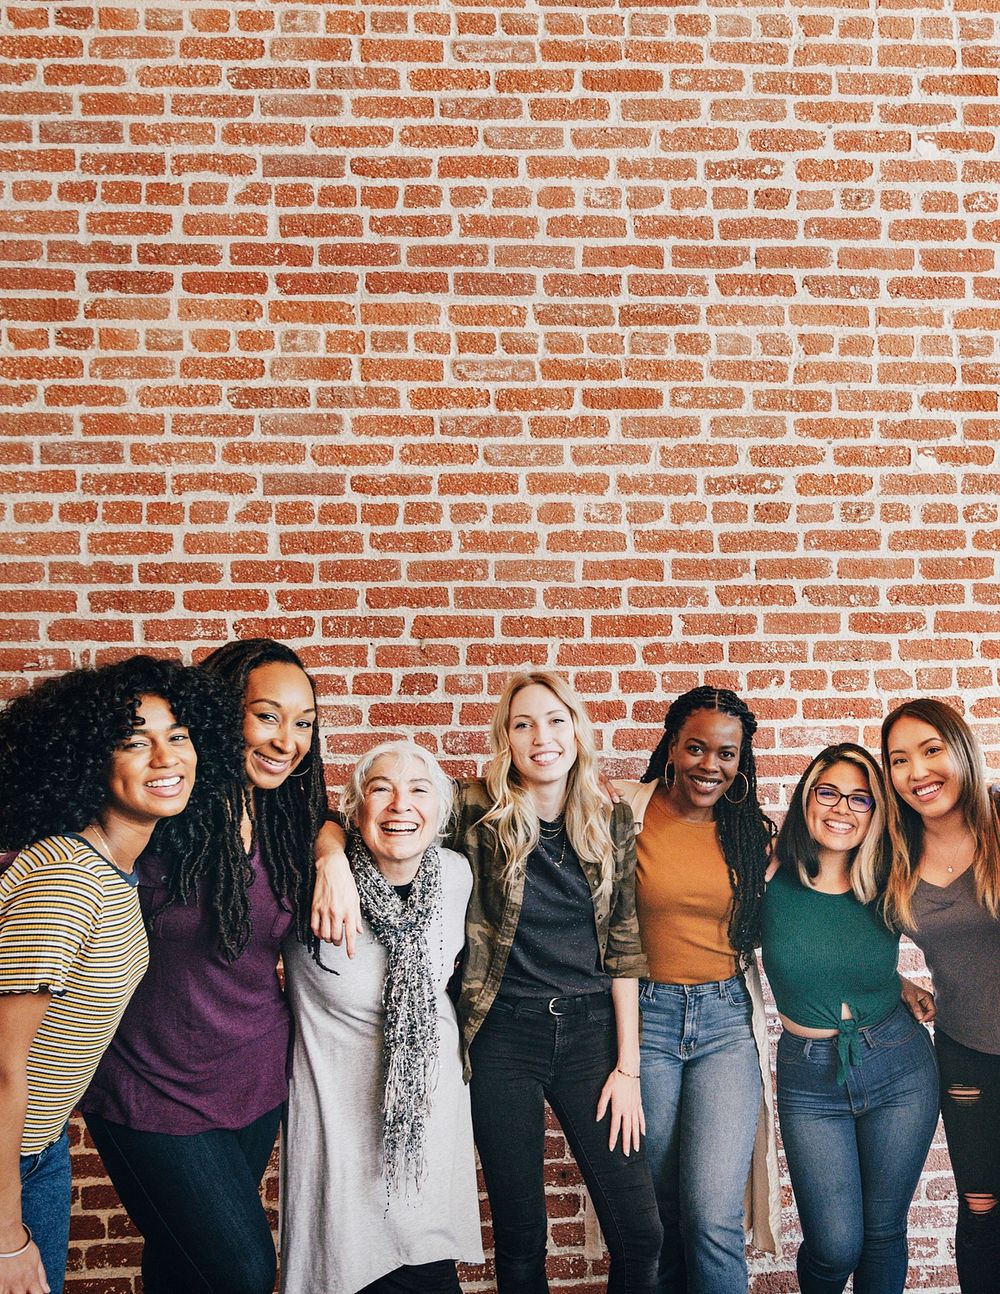 Diverse women standing together by a brick wall